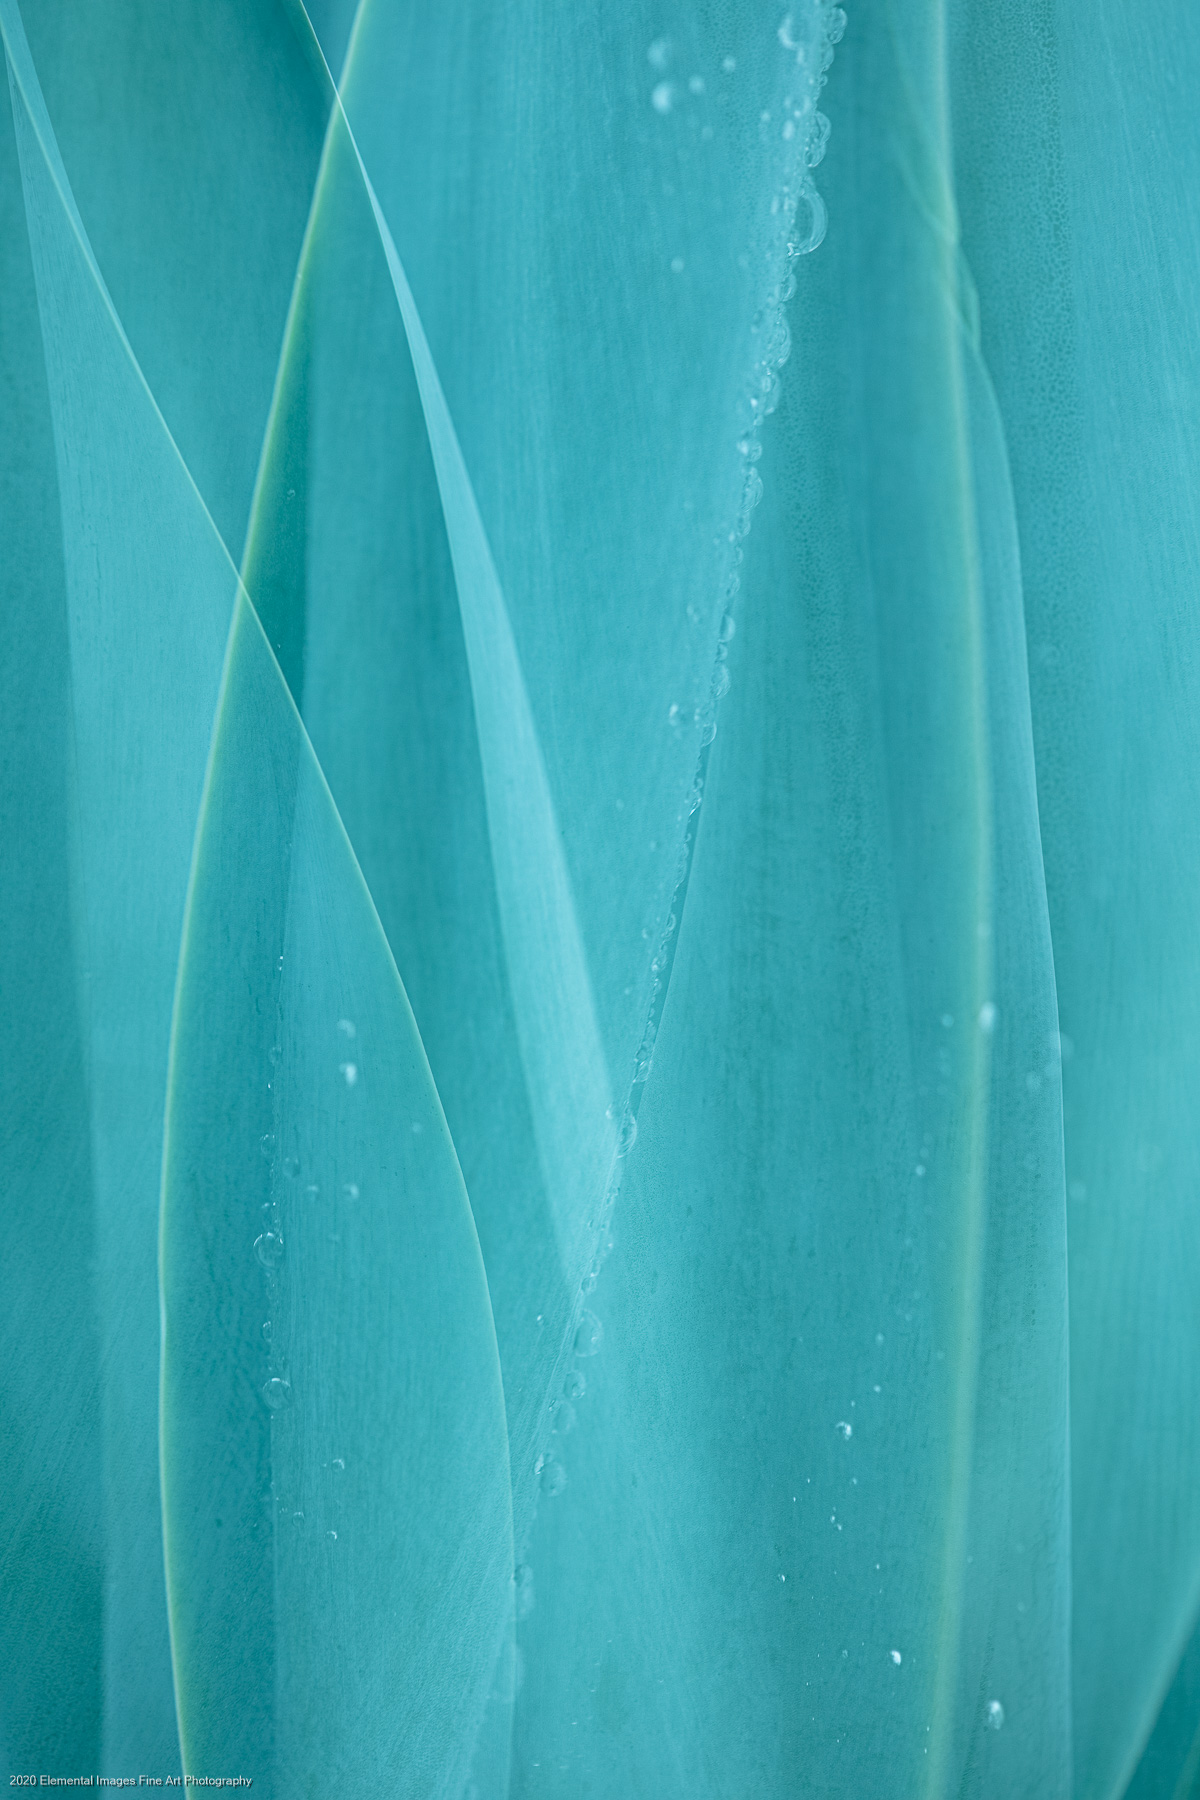 Agaves #42 | San Marino | CA |  - © 2020 Elemental Images Fine Art Photography - All Rights Reserved Worldwide